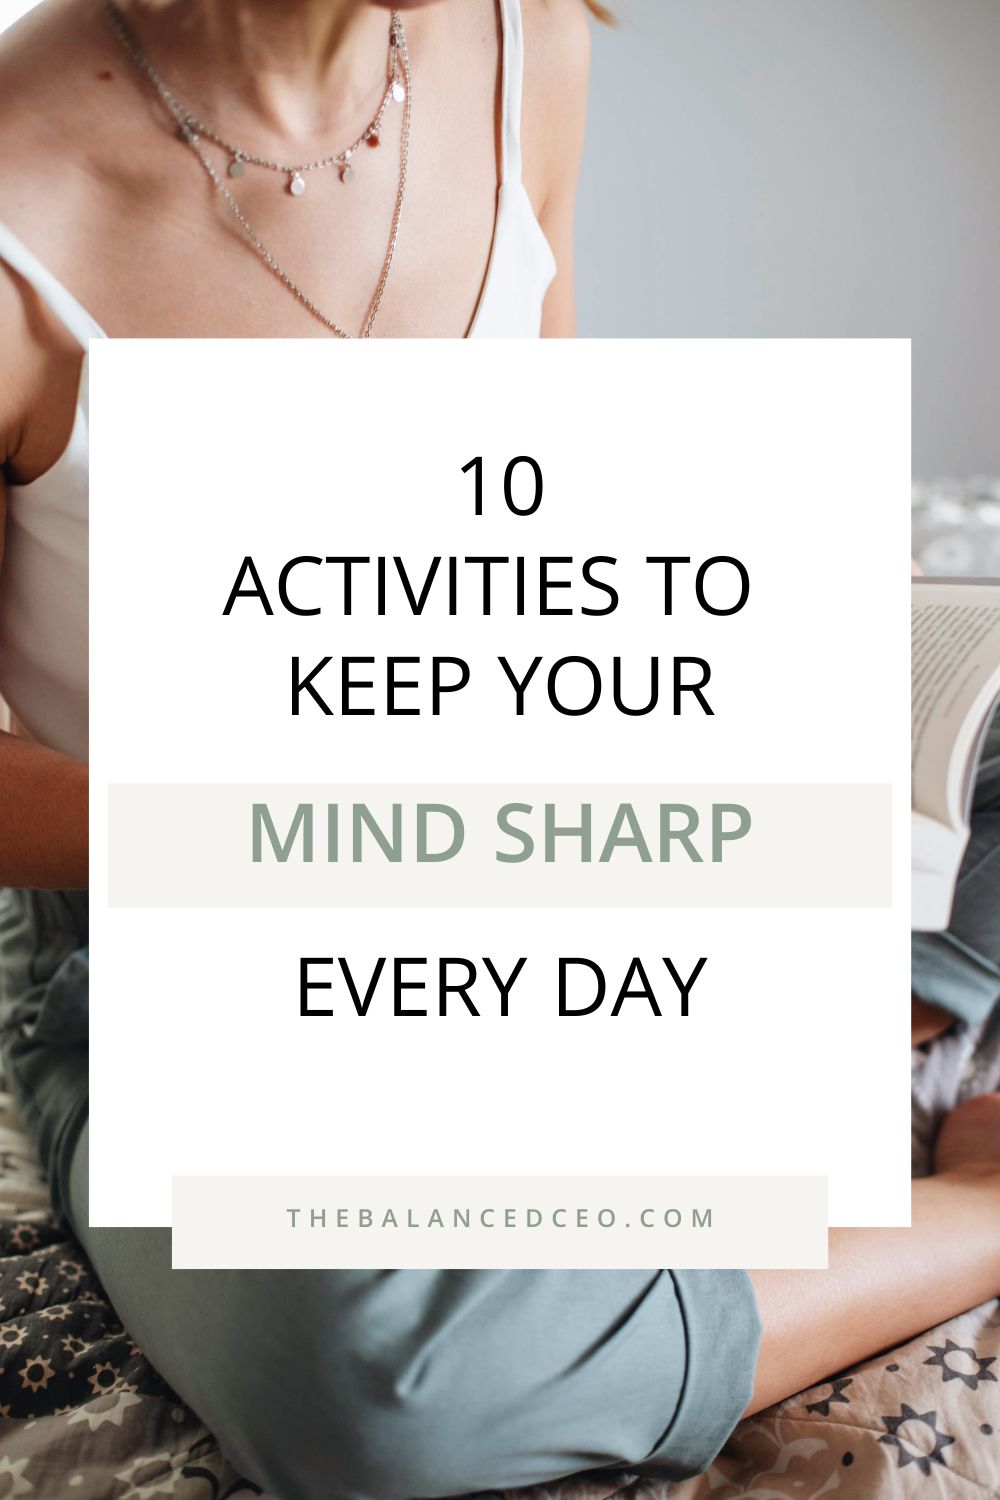 10 Activities to Keep Your Mind Sharp Every Day